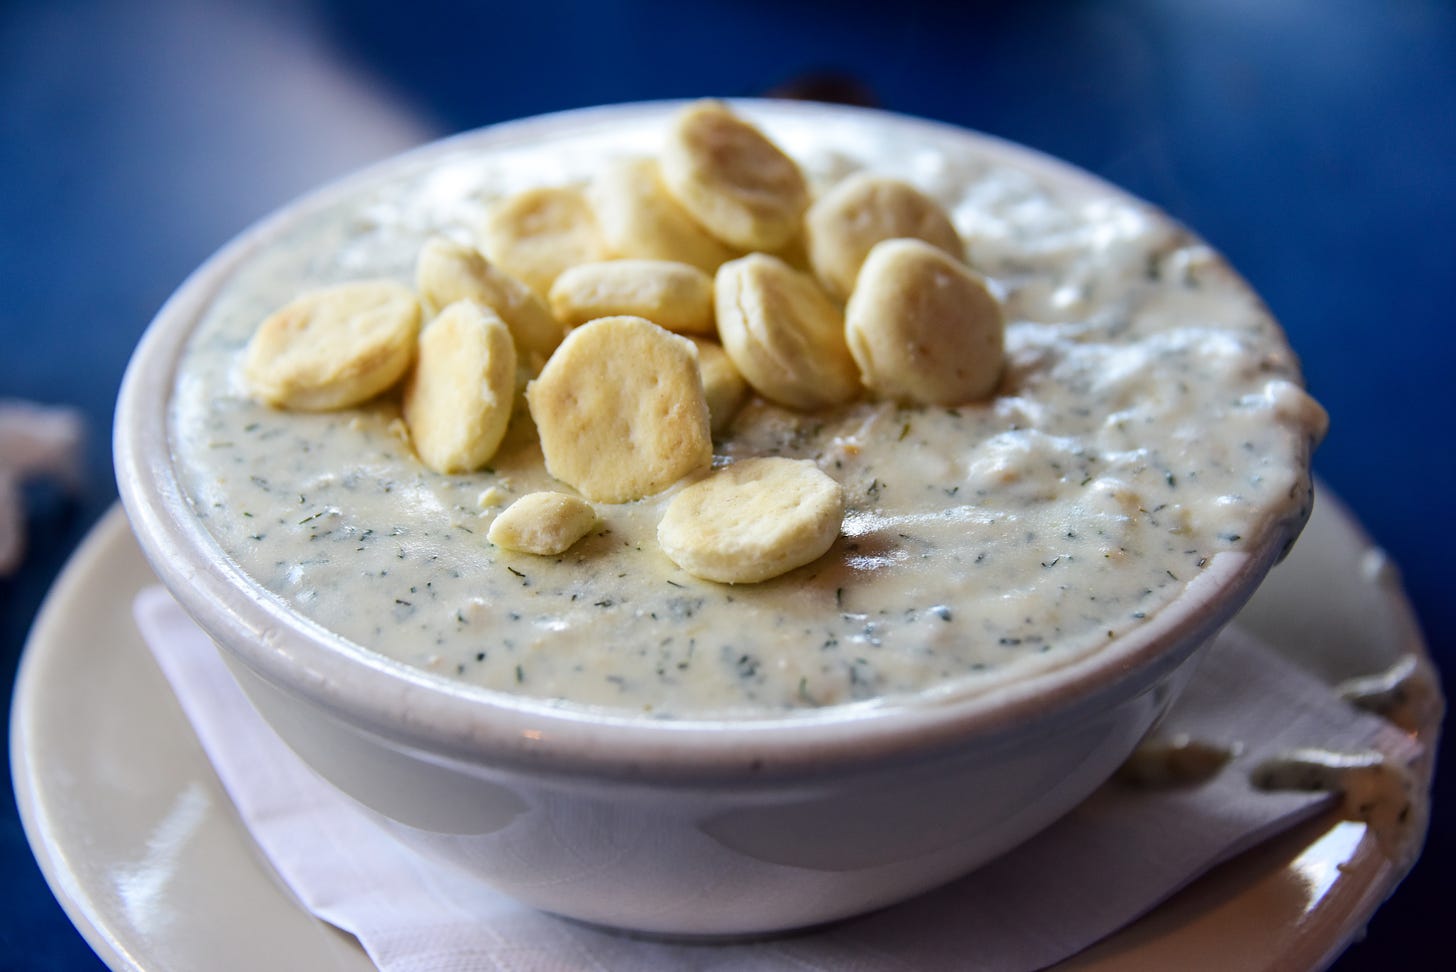 A bowl of clam chowder with a large pile of oyster crackers on top